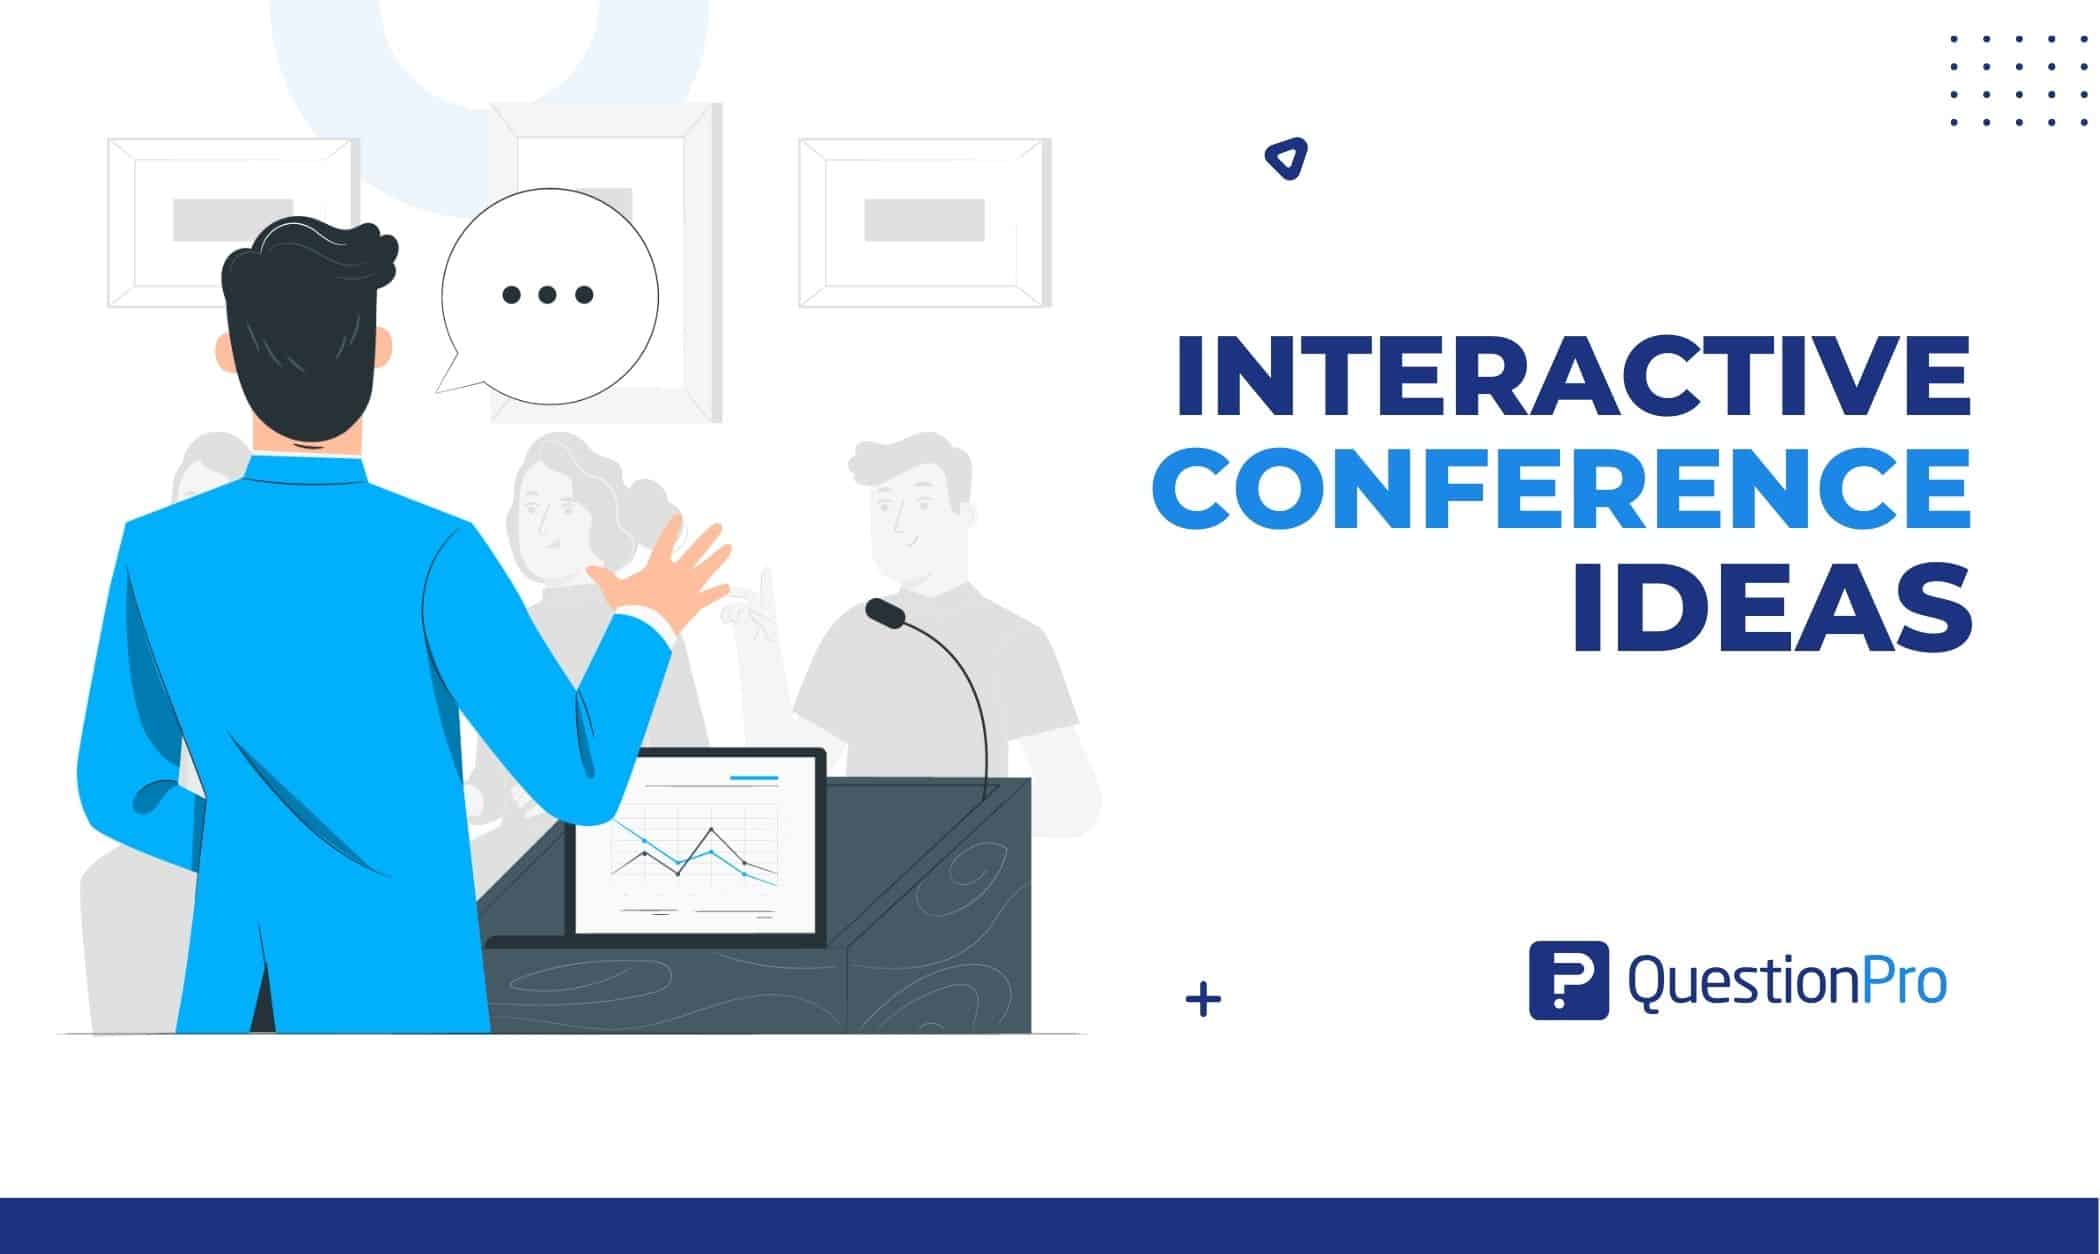 10 Interactive Conference Ideas to Boost Audience Engagement